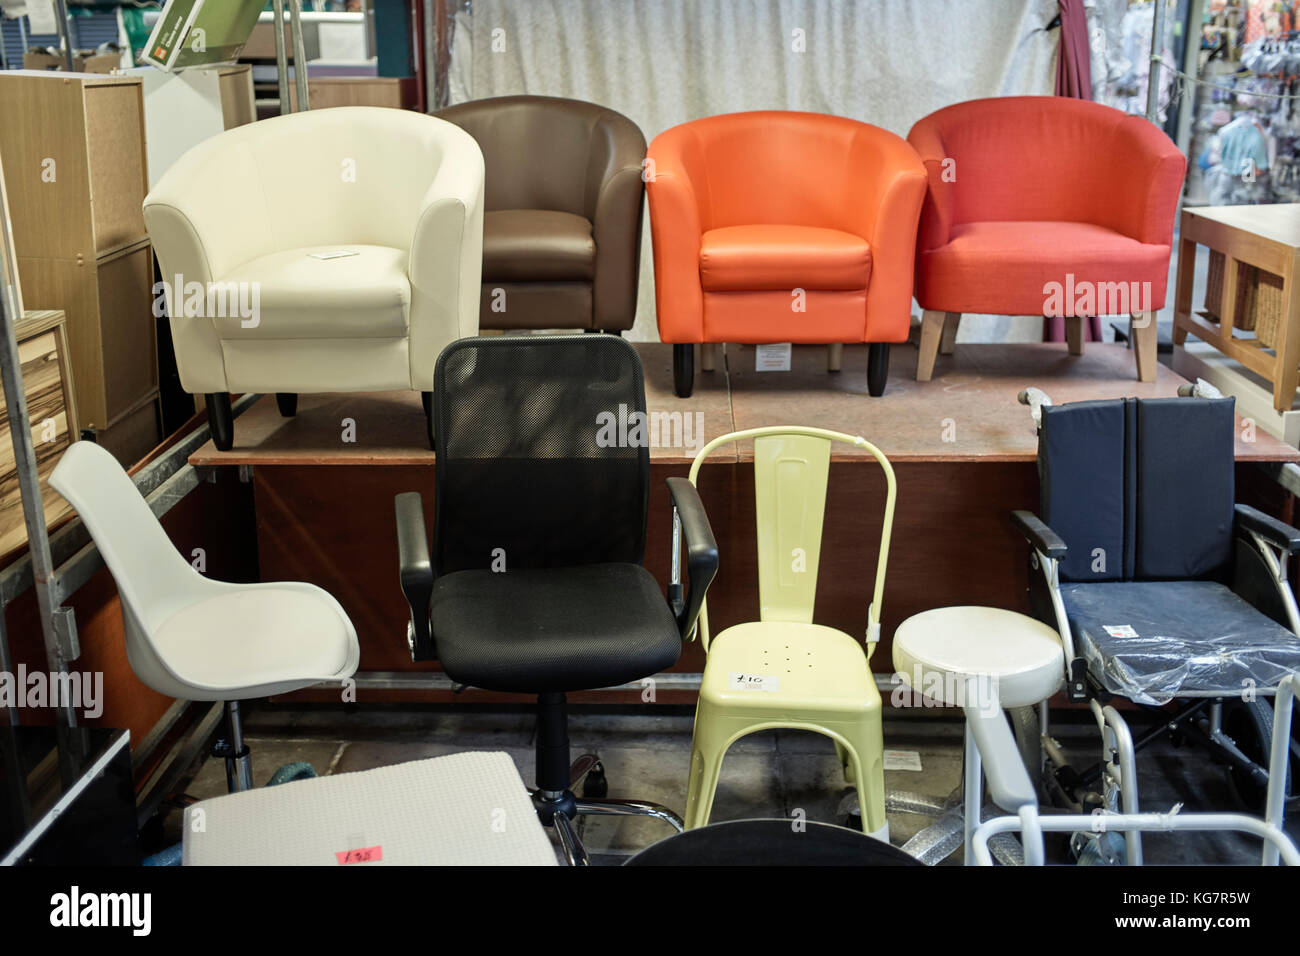 Seats for sale in an indoor market Stock Photo